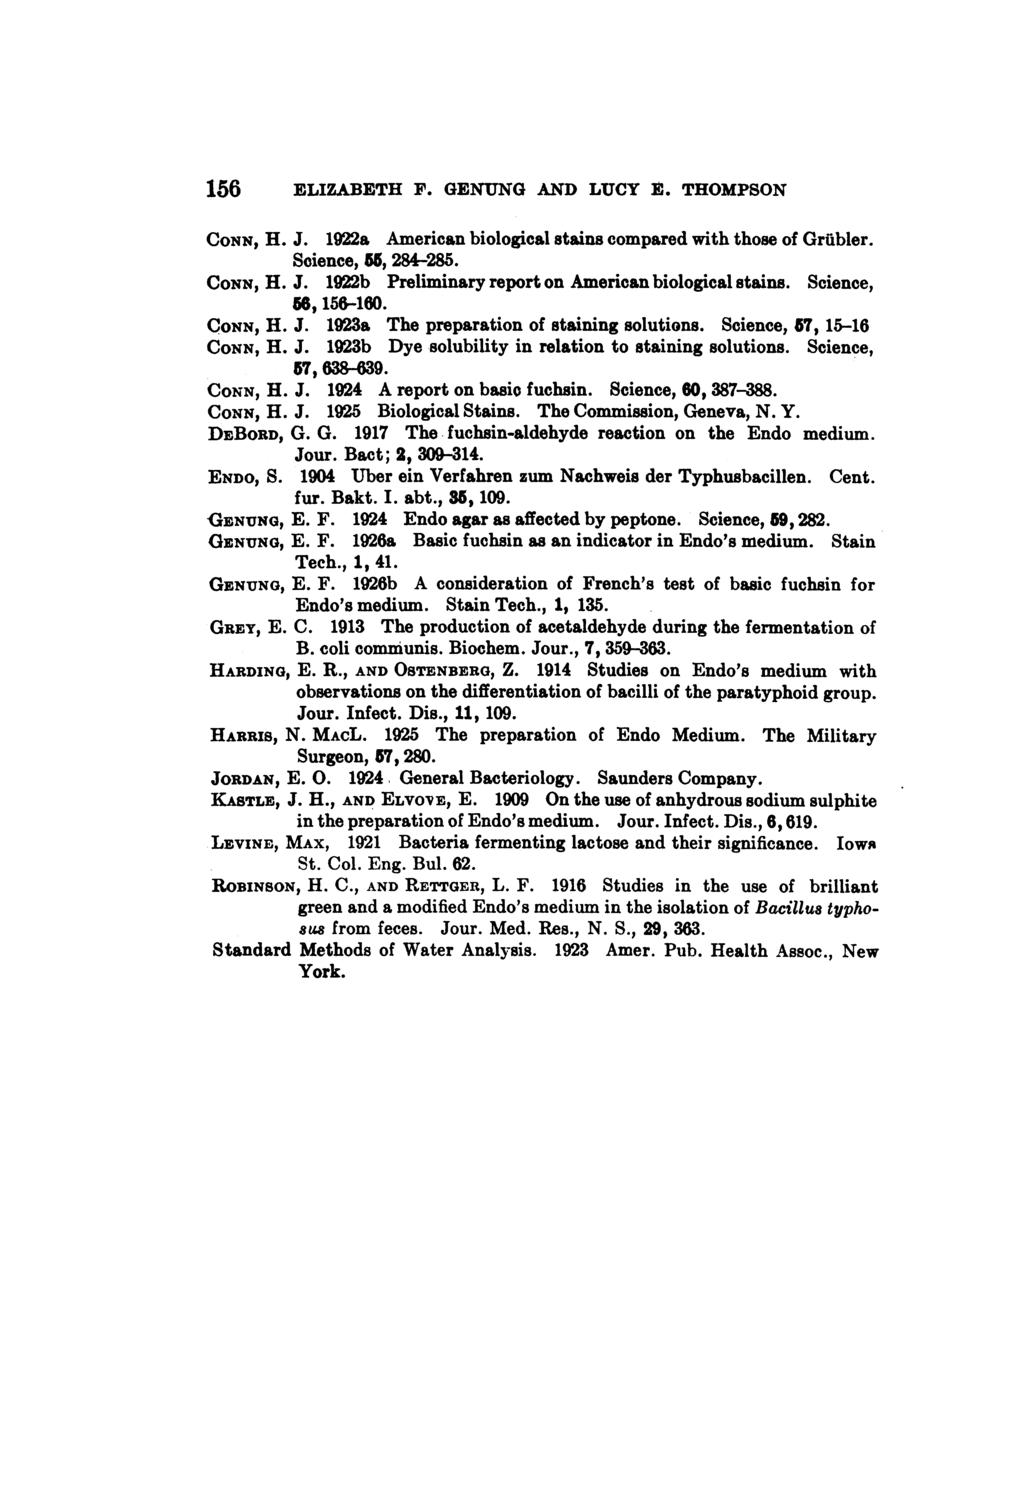 156 ELIZABETH F. GENUNG AND LUCY E. THOMPSON CONN, H. J. 1922a American biological stains compared with those of Grubler. Science, 55, 284-285. CONN, H. J. 1922b Preliminary report on American biological stains.